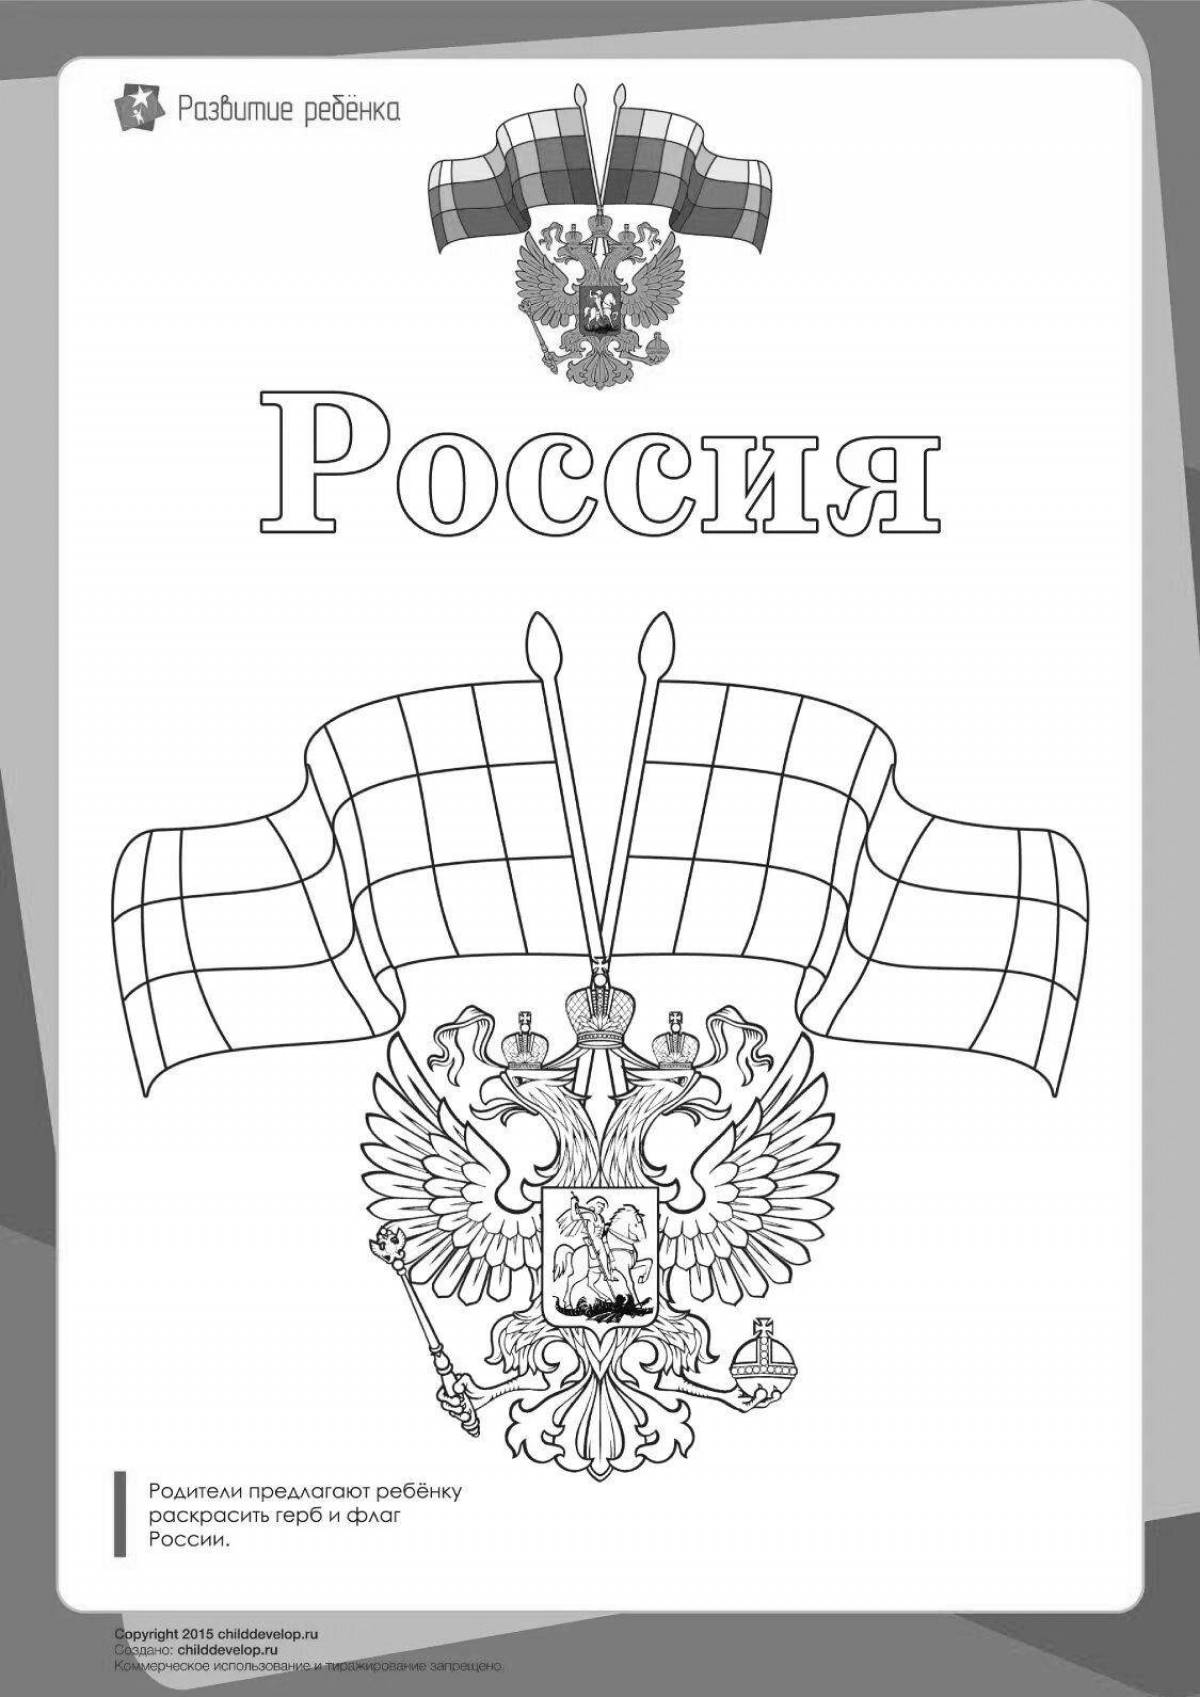 Large flag and coat of arms of Russia